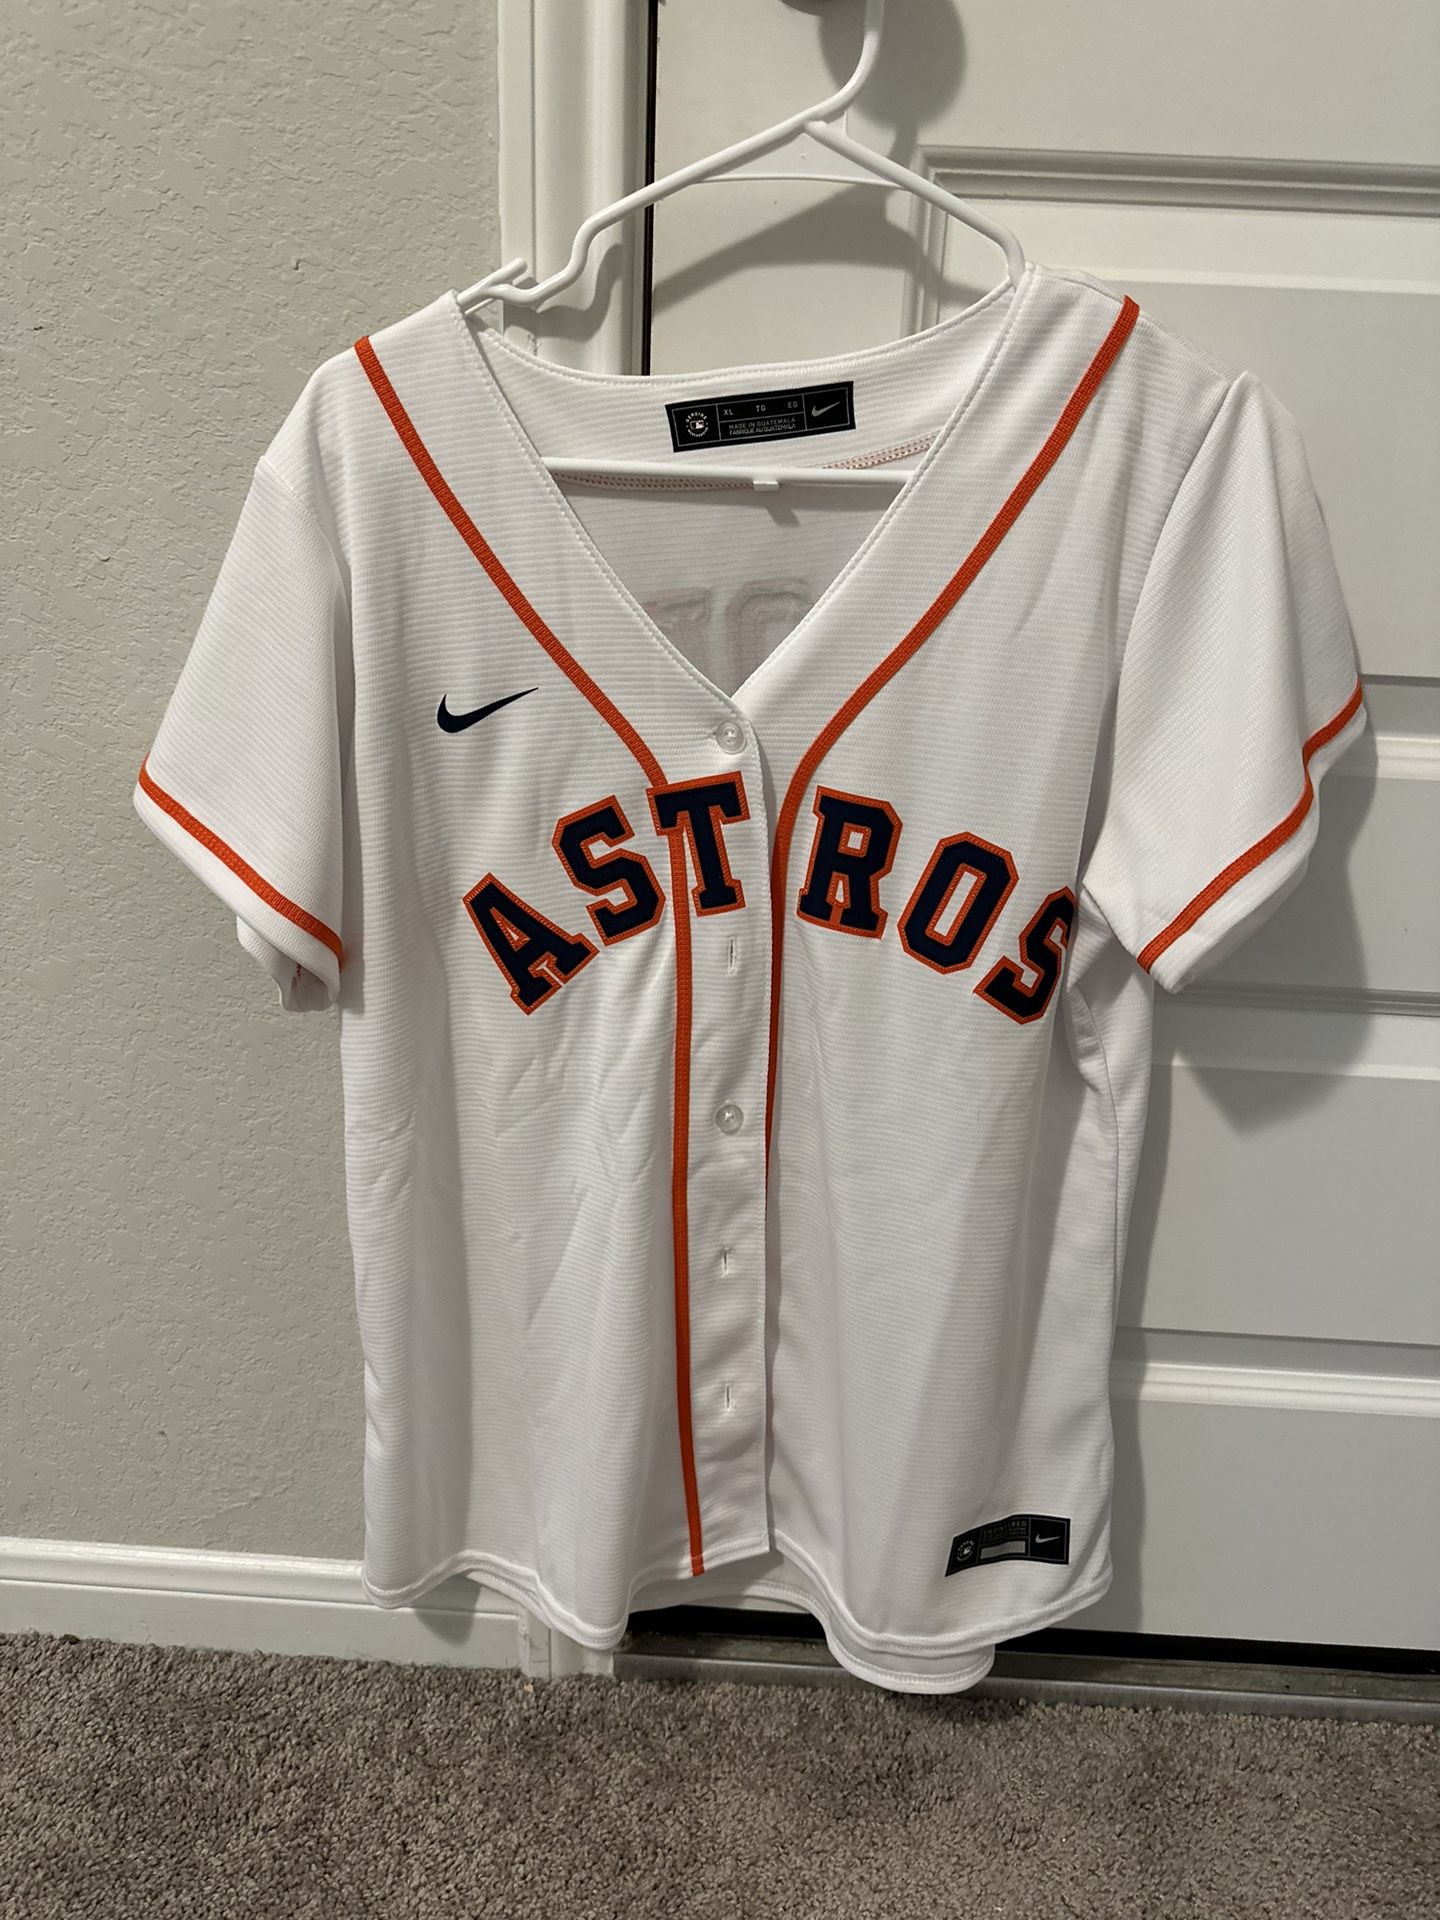 Astros Jersey for Sale in Kyle, TX - OfferUp